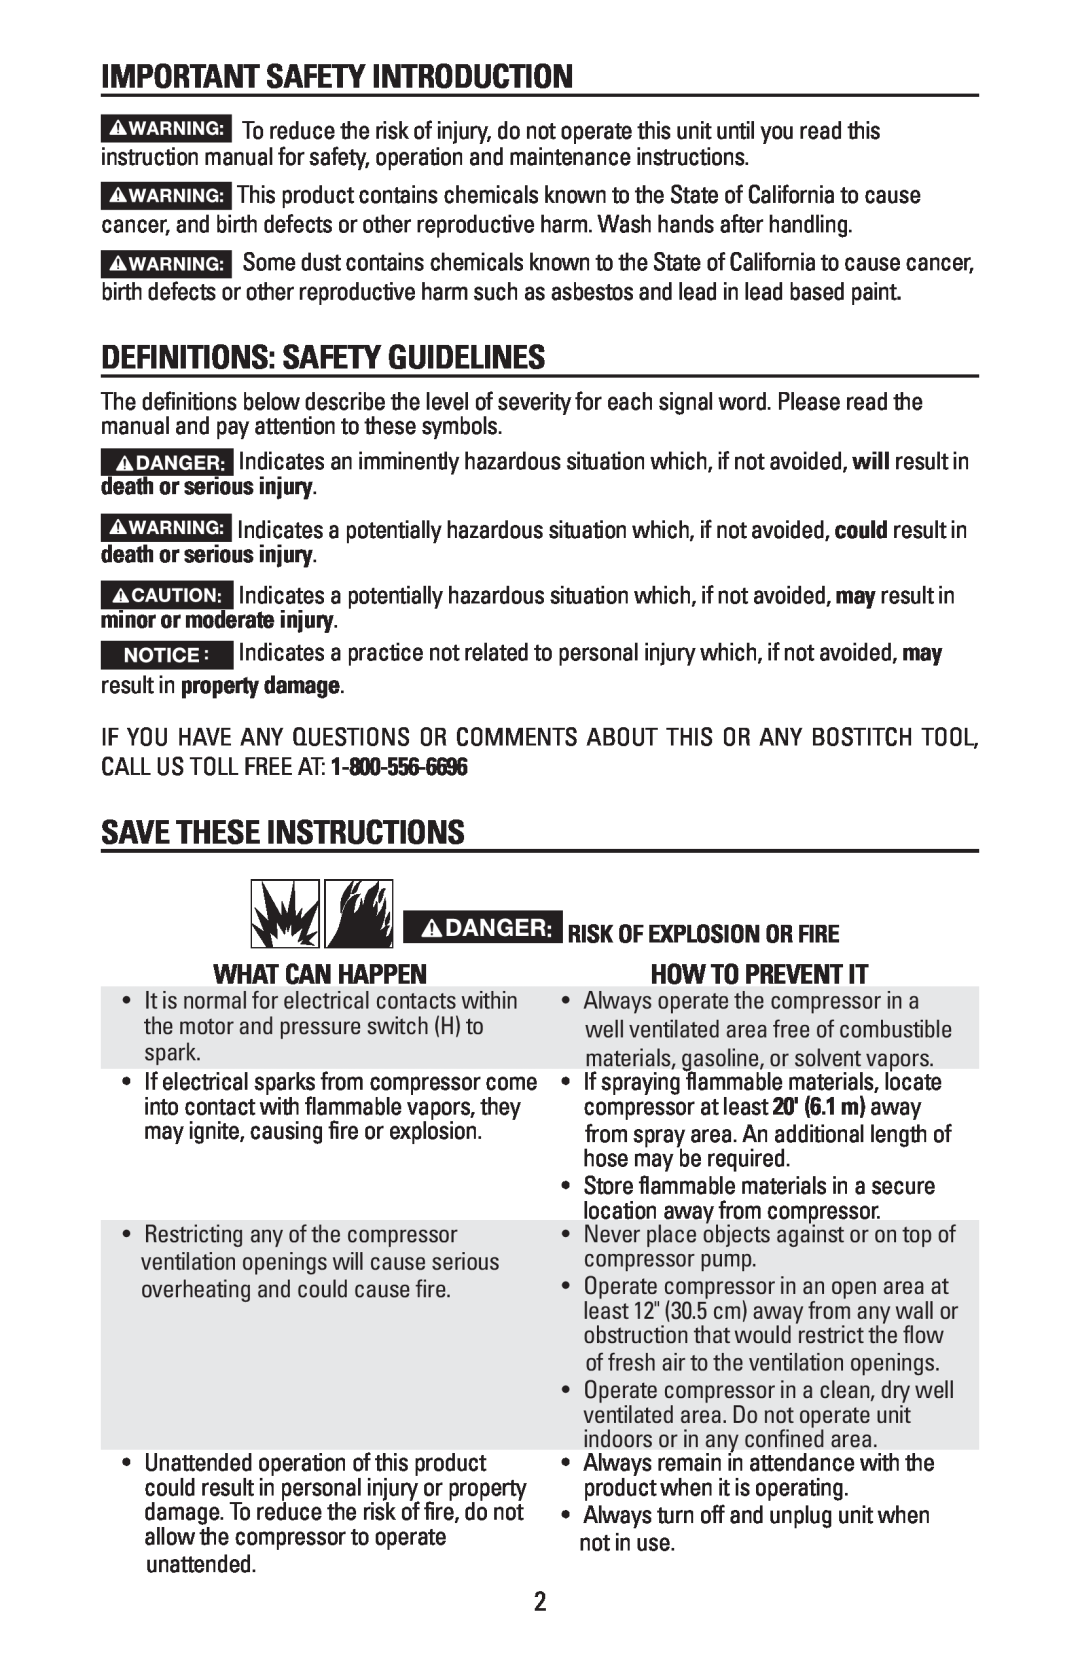 Bostitch CAP1645-OF owner manual Important Safety Introduction, Definitions: Safety Guidelines, Save These Instructions 